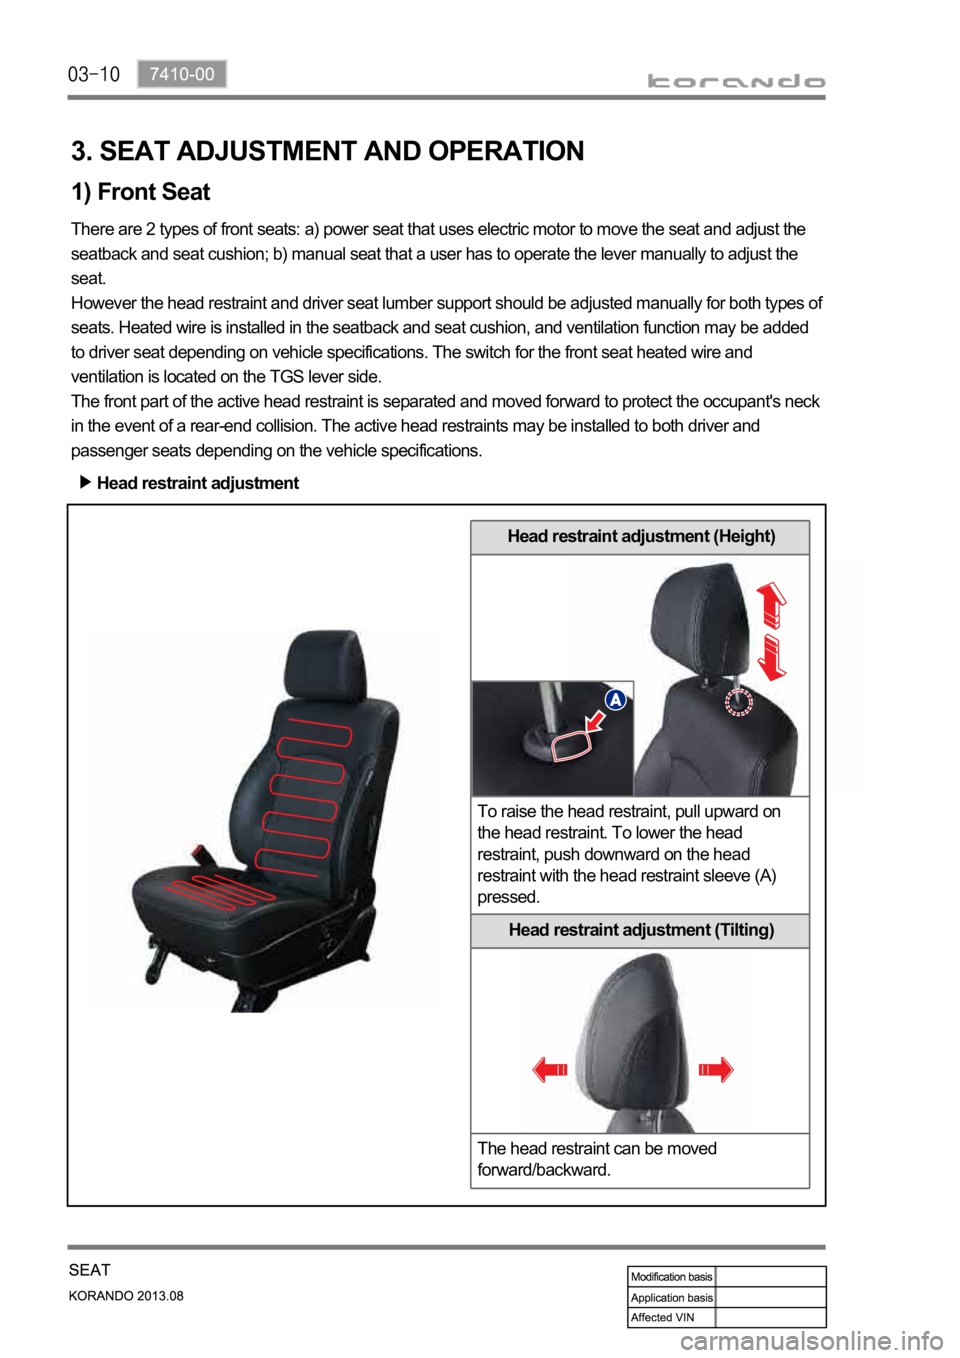 SSANGYONG KORANDO 2013  Service Manual Head restraint adjustment (Height)
To raise the head restraint, pull upward on 
the head restraint. To lower the head 
restraint, push downward on the head 
restraint with the head restraint sleeve (A